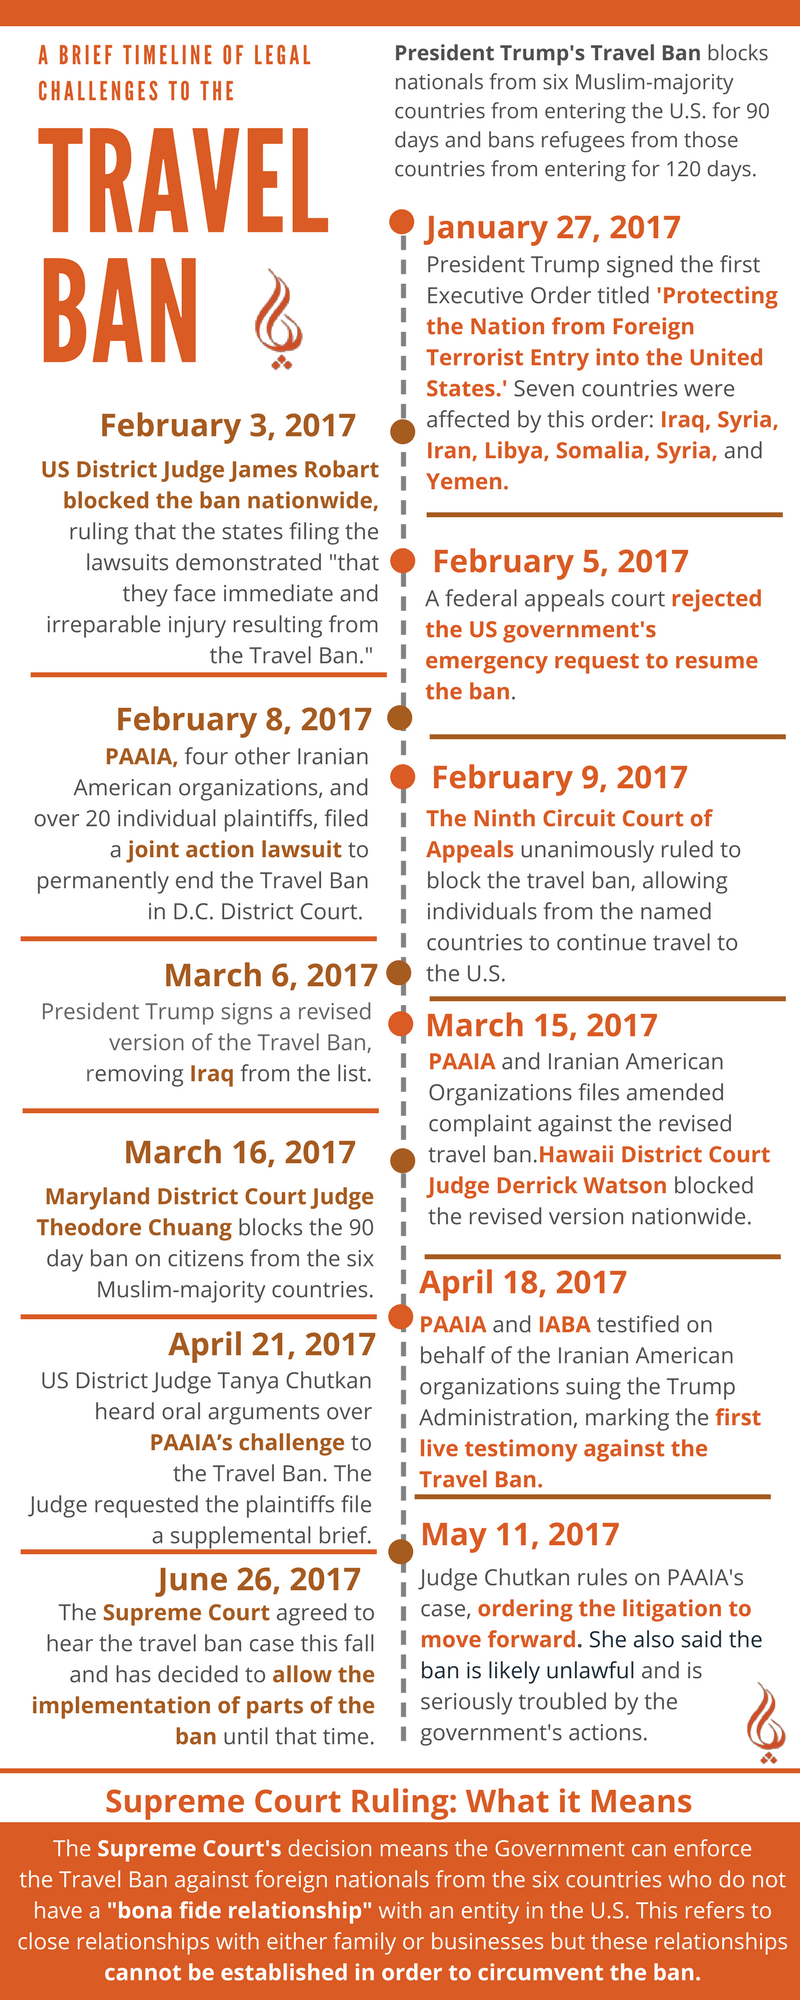 Timeline: Legal Challenges to the Travel Ban - PAAIA